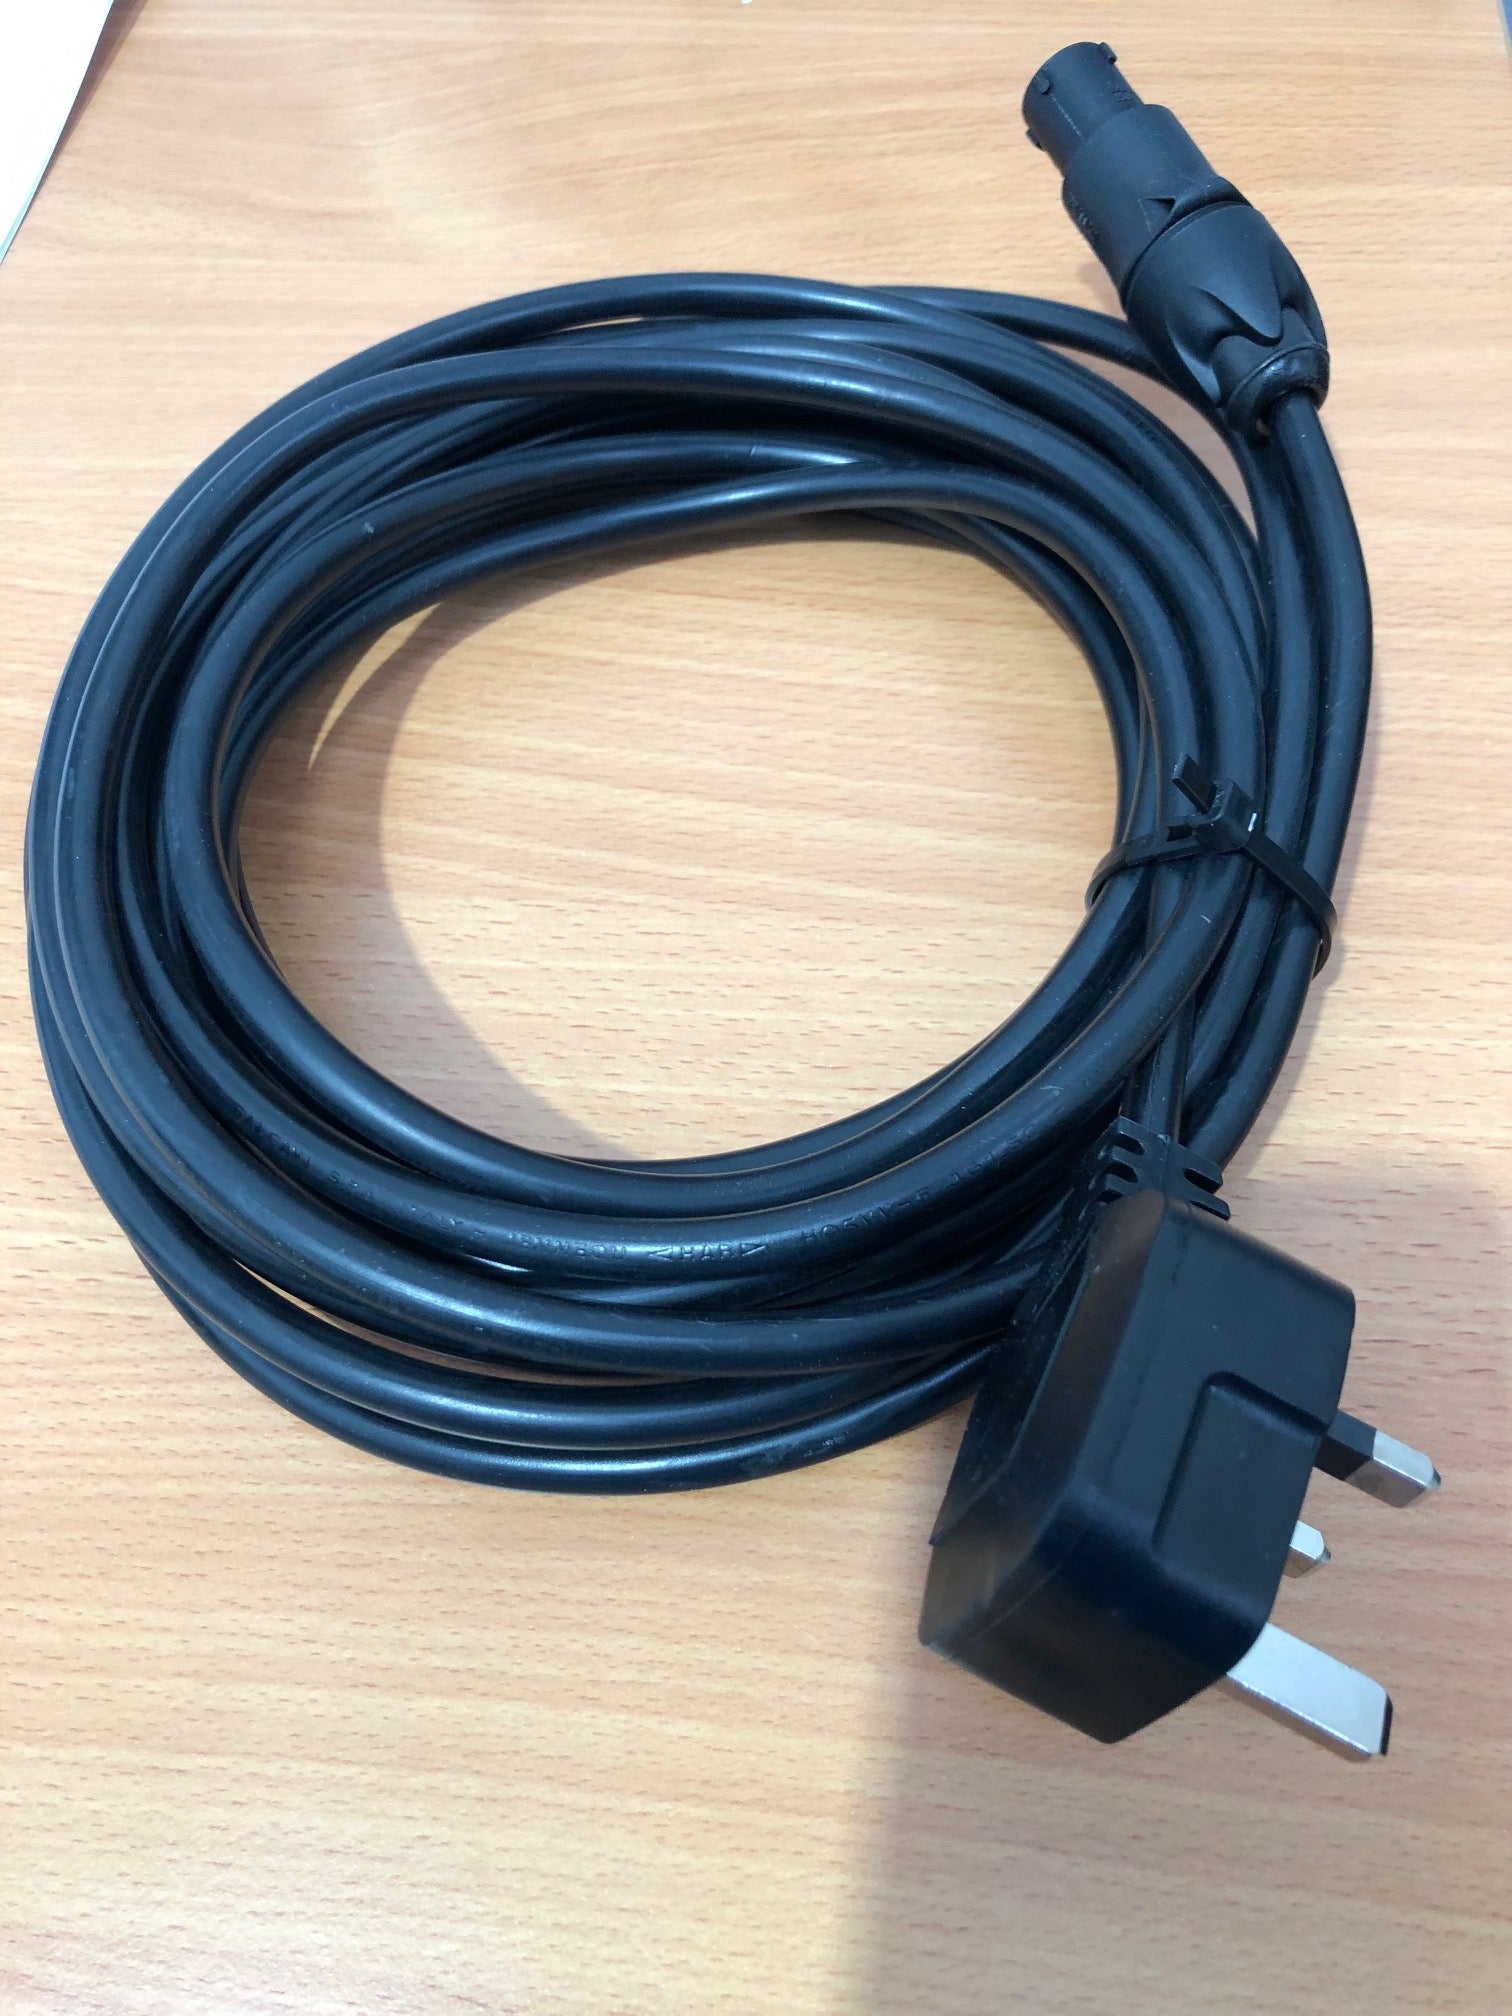 E13733/BE4901 Complete cable with connector for Prochem Endeavor.